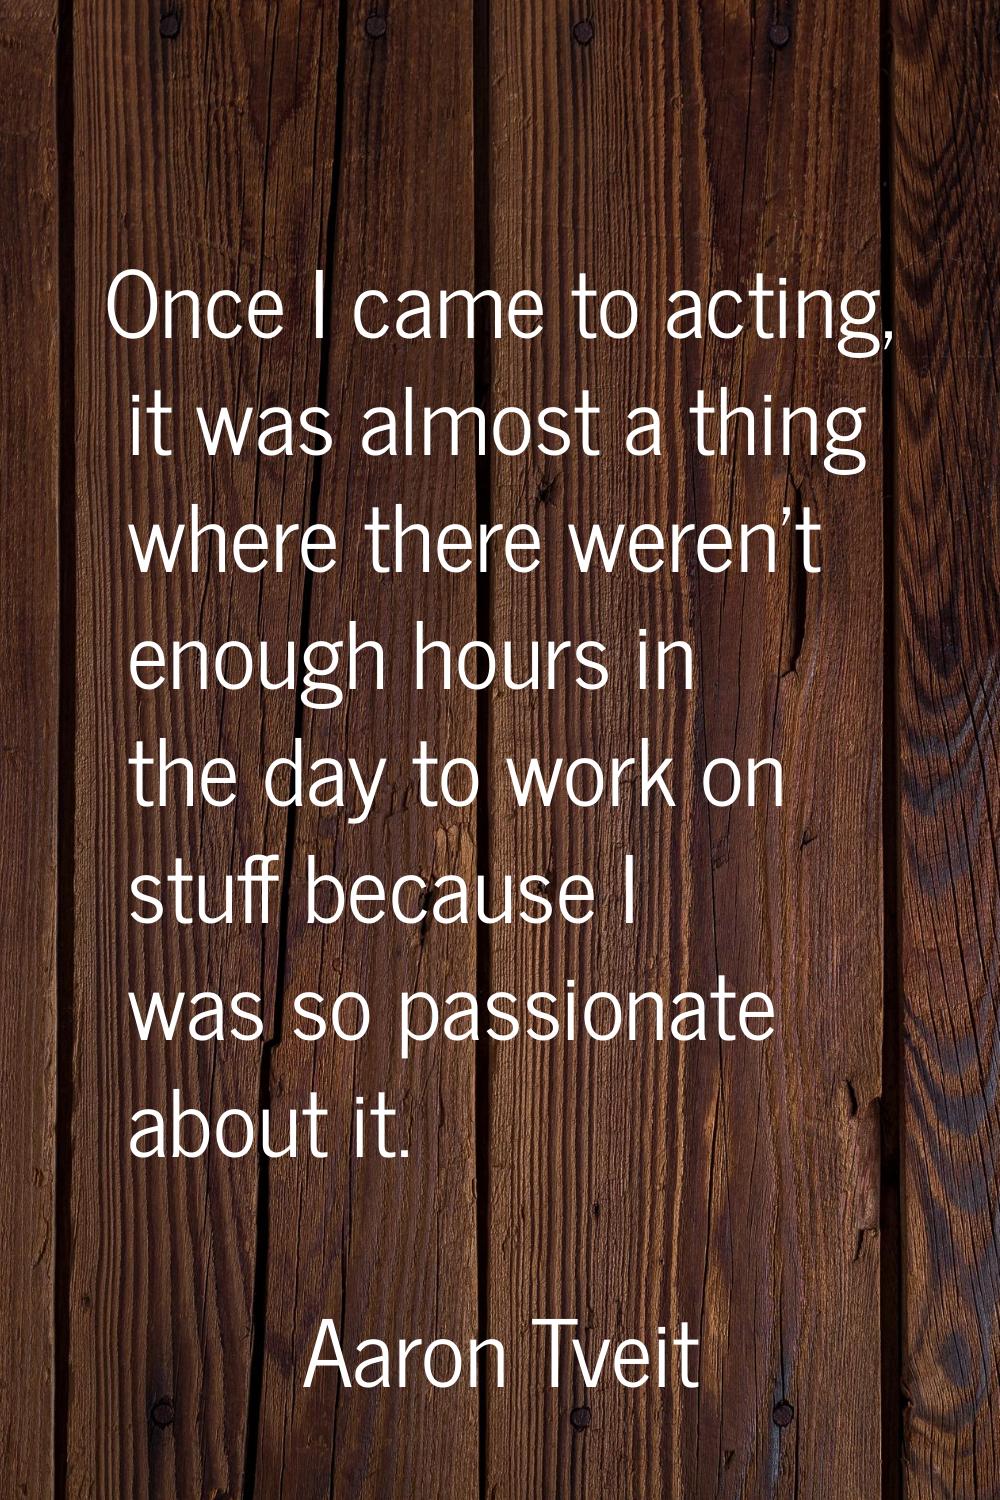 Once I came to acting, it was almost a thing where there weren't enough hours in the day to work on